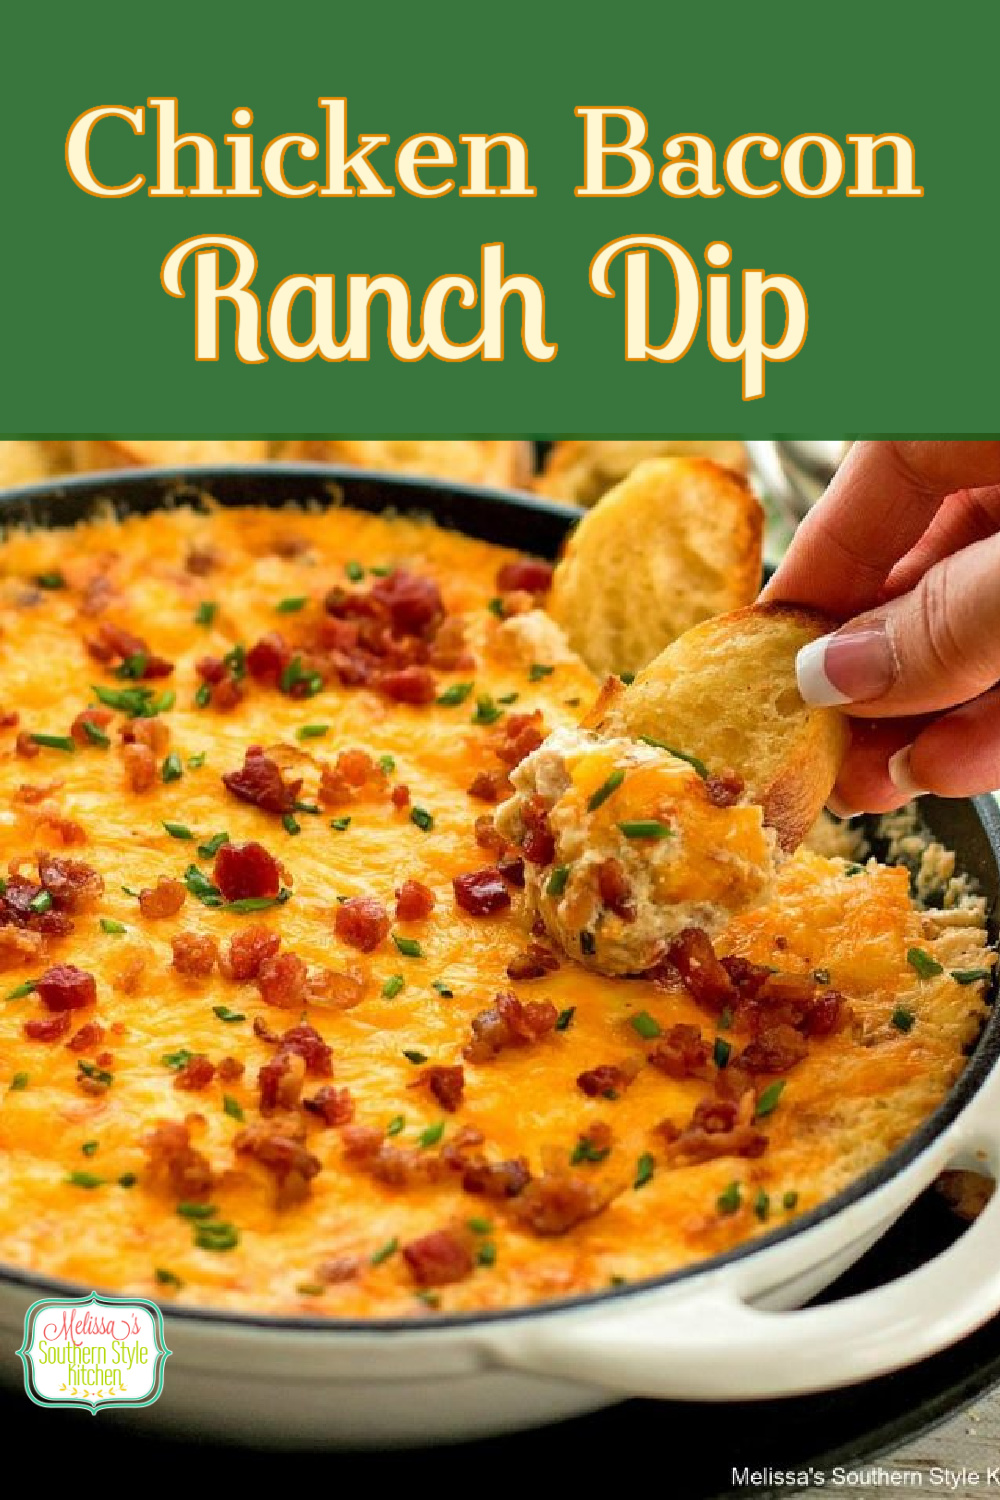 This gooey Chicken Bacon Ranch Dip is impossible to resist. It's practically a meal on it's own perfect for those days you want to dip your dinner #chickenbaconranch #chickenbacondip #bacondip #diprecipes #ranchdressing #easychickenrecipes #appetizers #bacon #southernfood #southernrecipes #tailgating #footballfood #gamedayrecipes #holidayrecipes